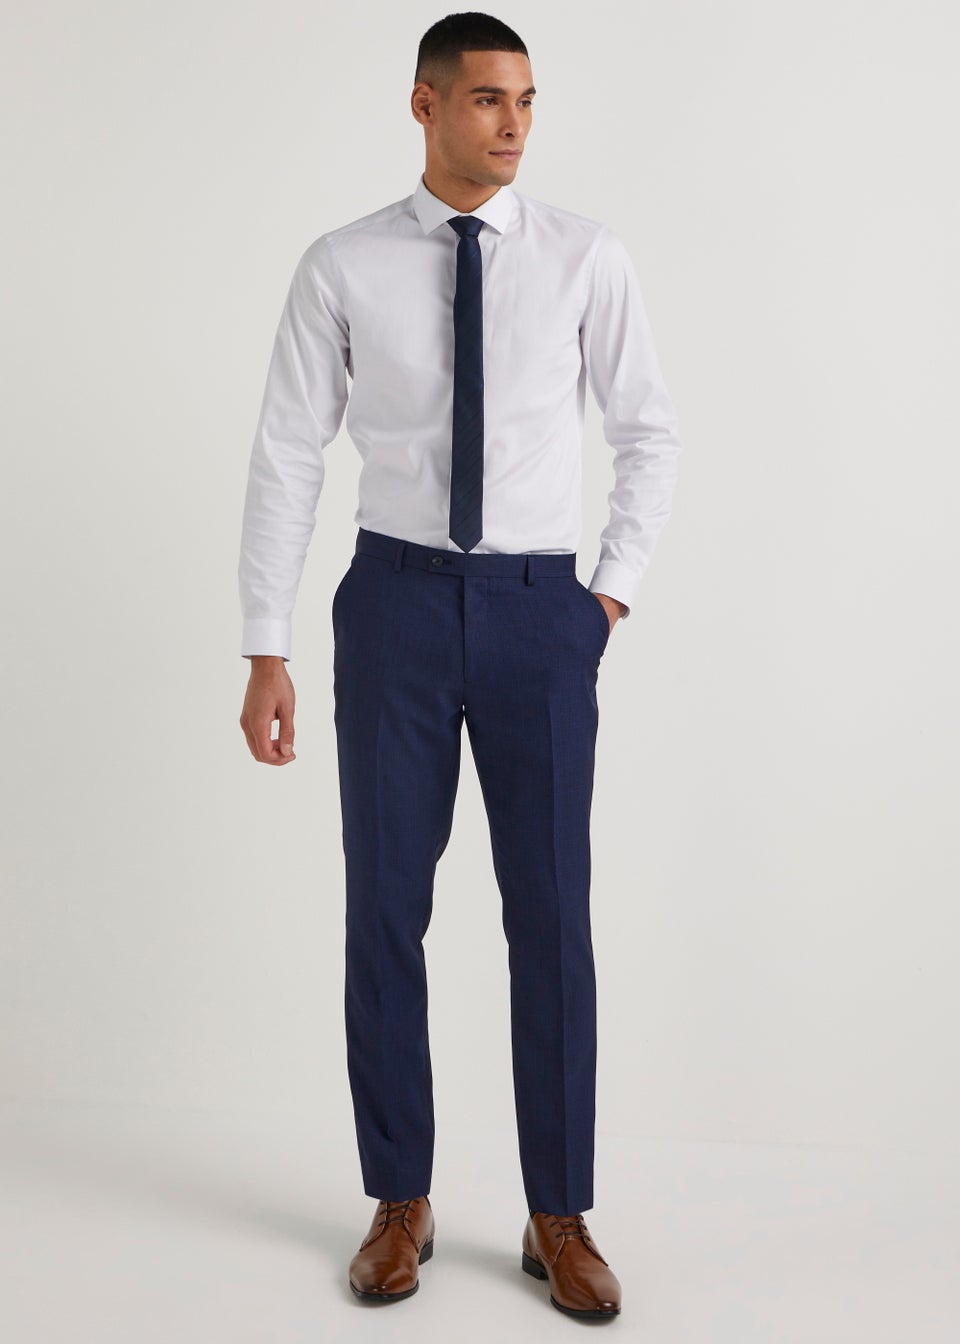 Taylor & Wright Cooper Navy Skinny Fit Suit Trousers